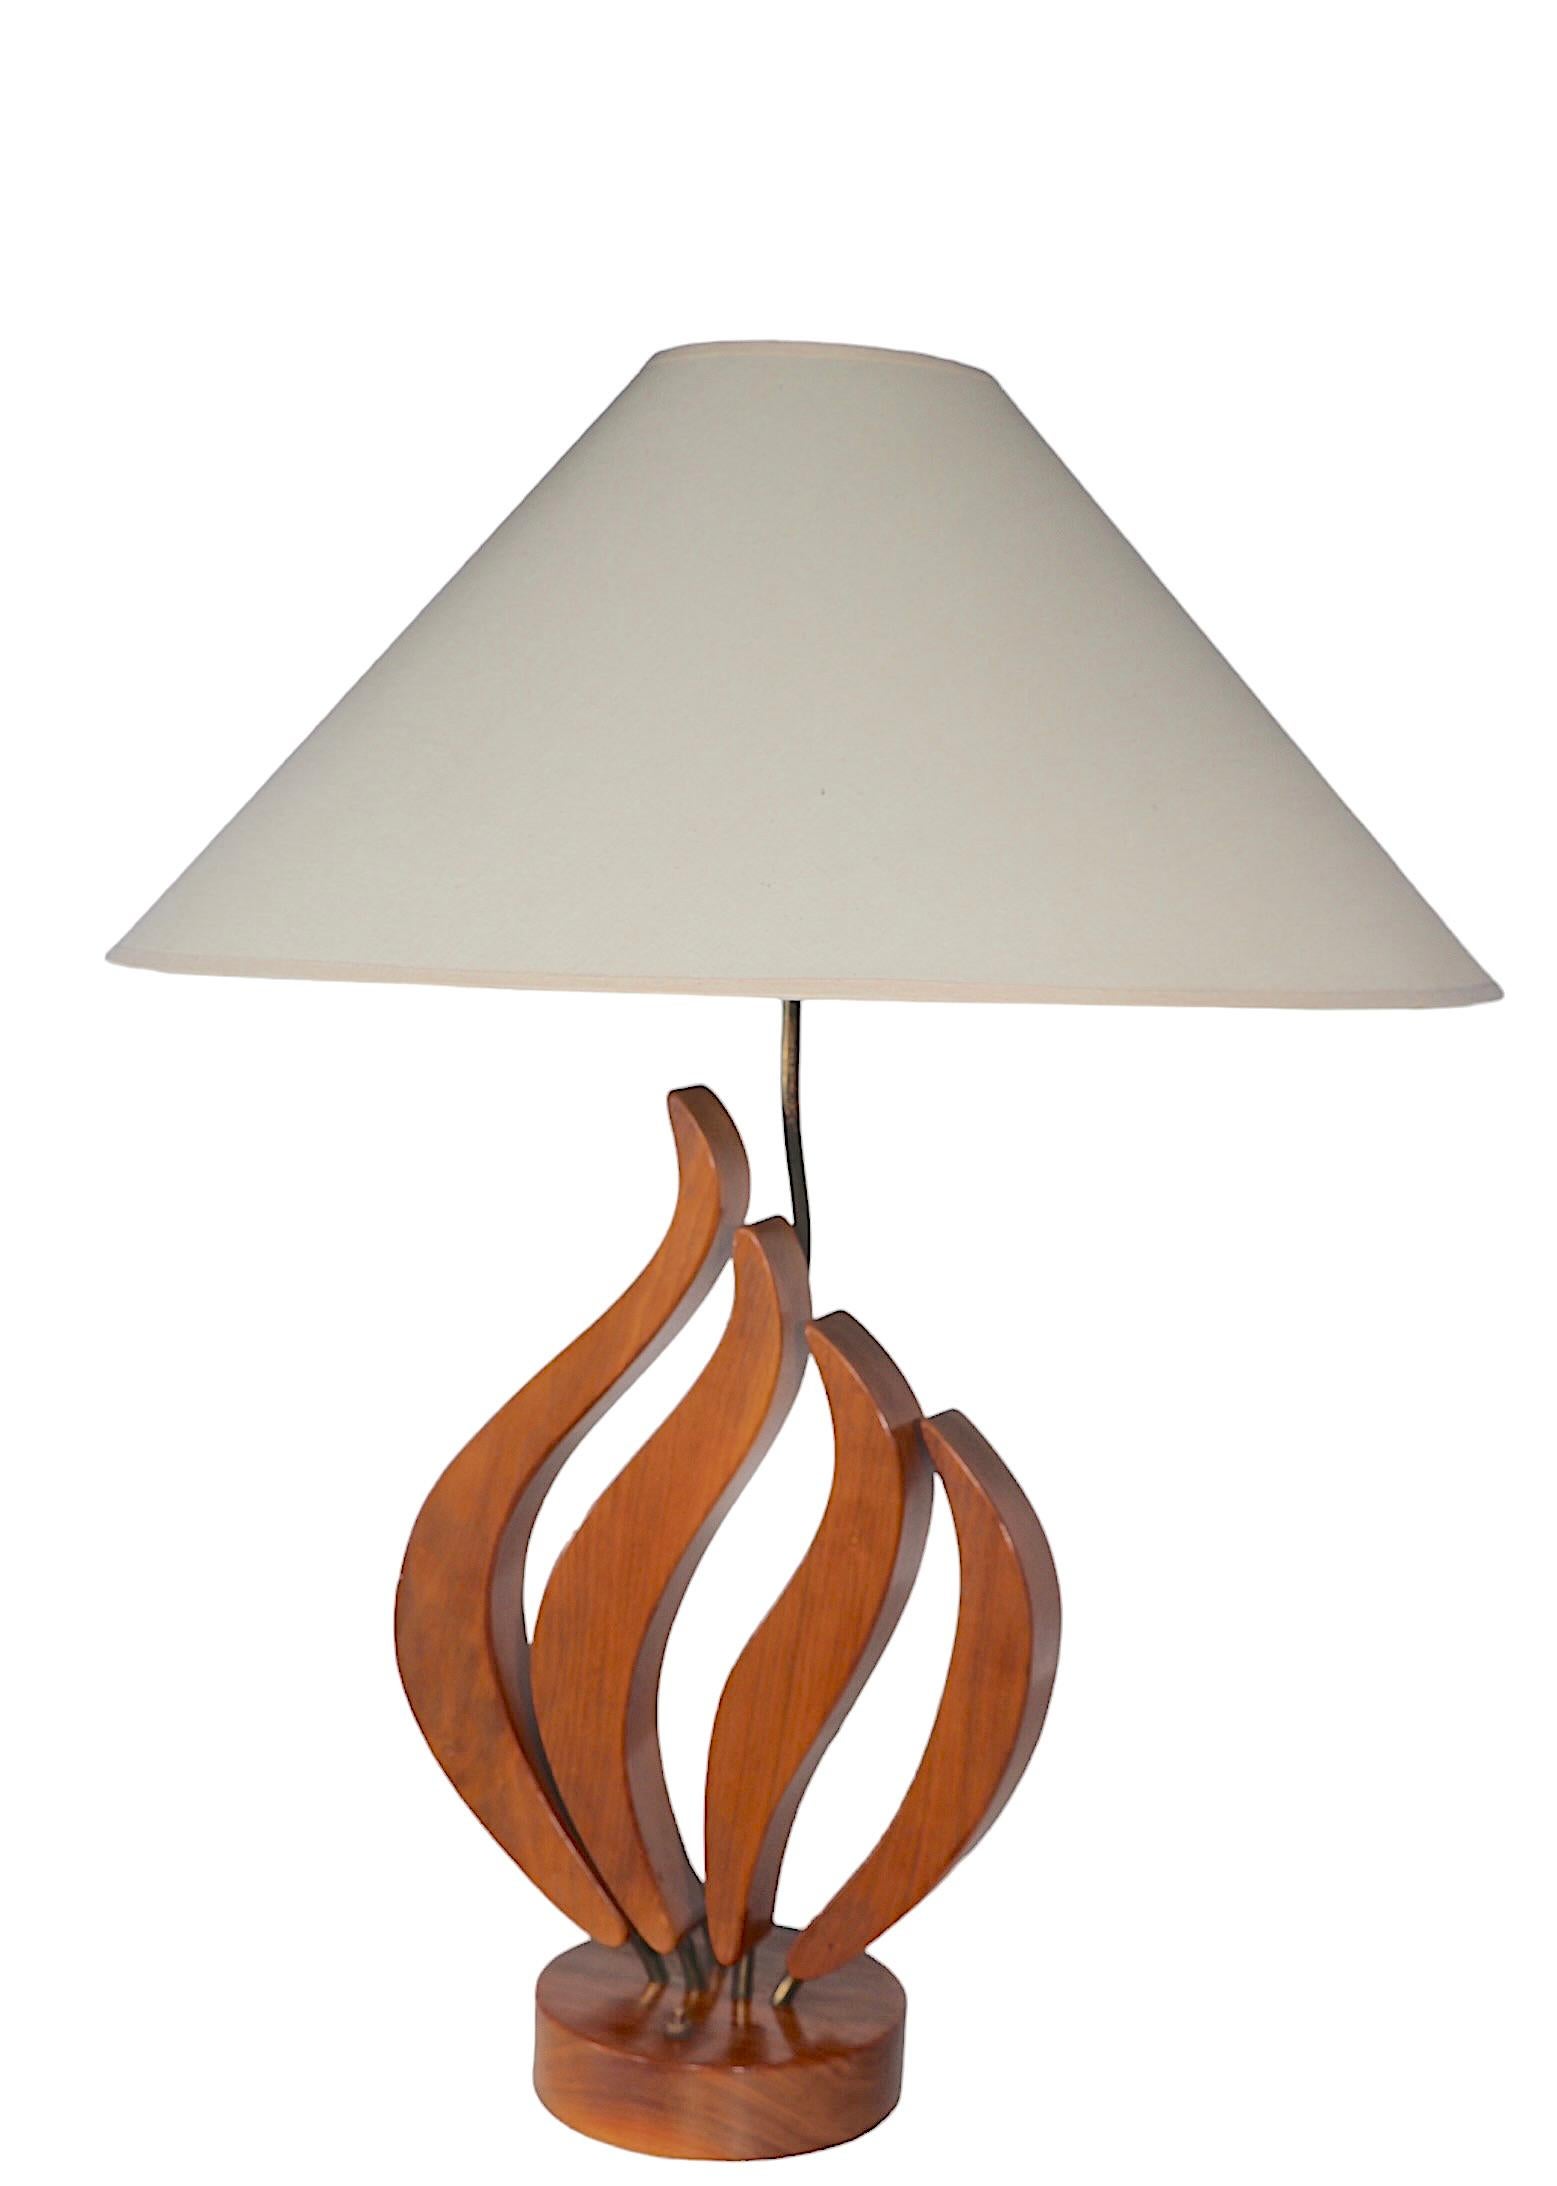 American Mid Century Sculpted Wood Organic Form Table Lamp c 1950's  For Sale